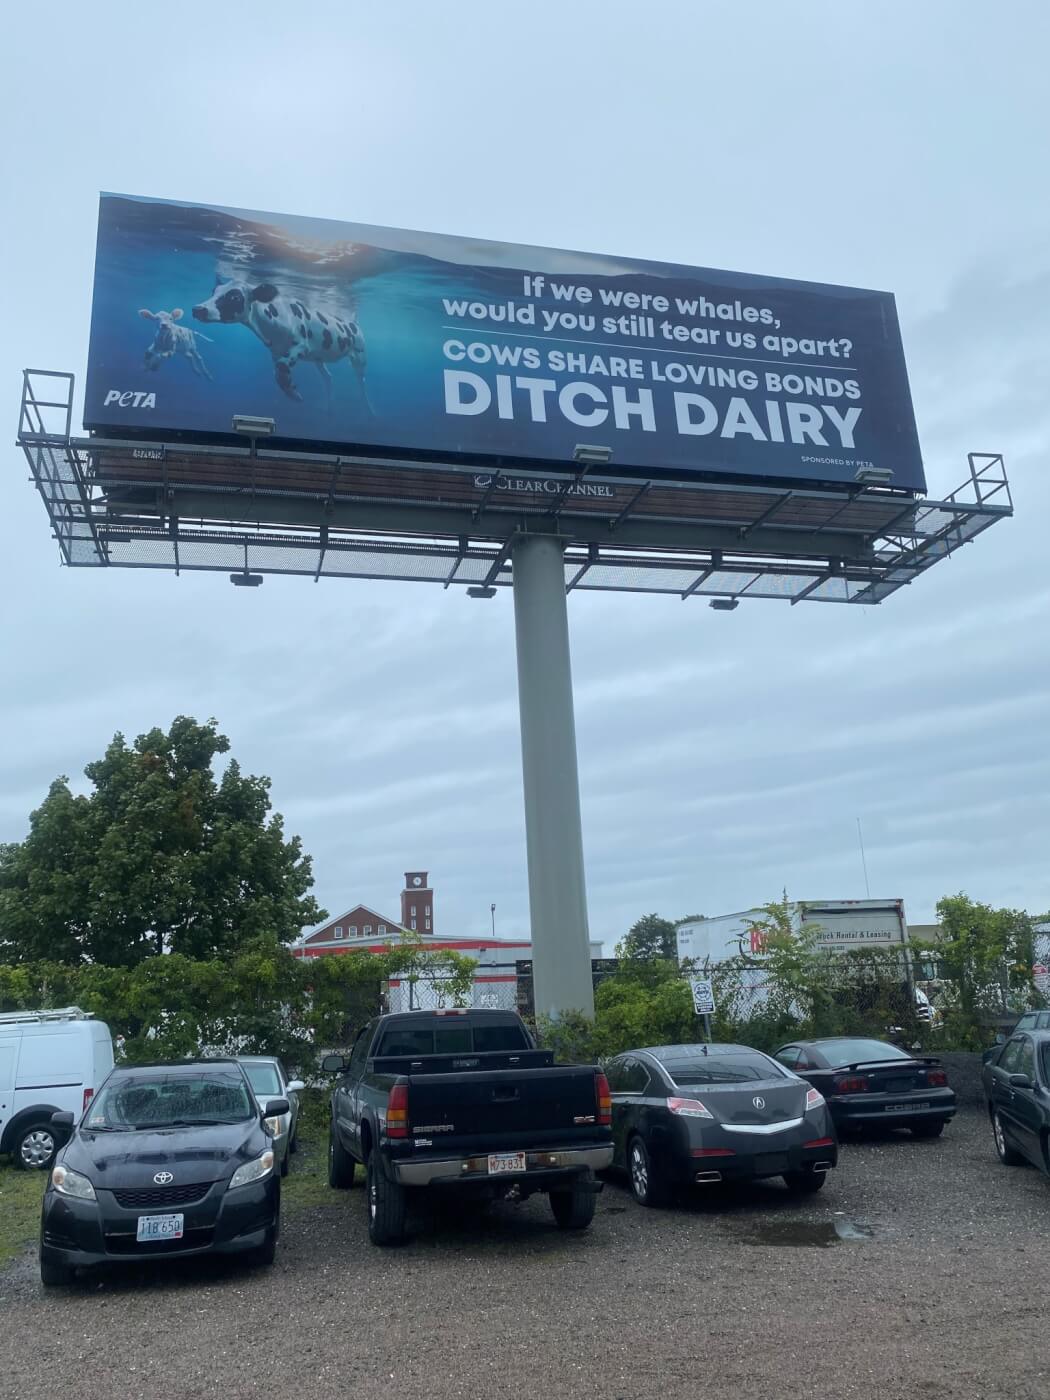 new bedford whale ad 1 1536x2048 1 Nationwide Ad Shows How Cows and Whales Are Alike